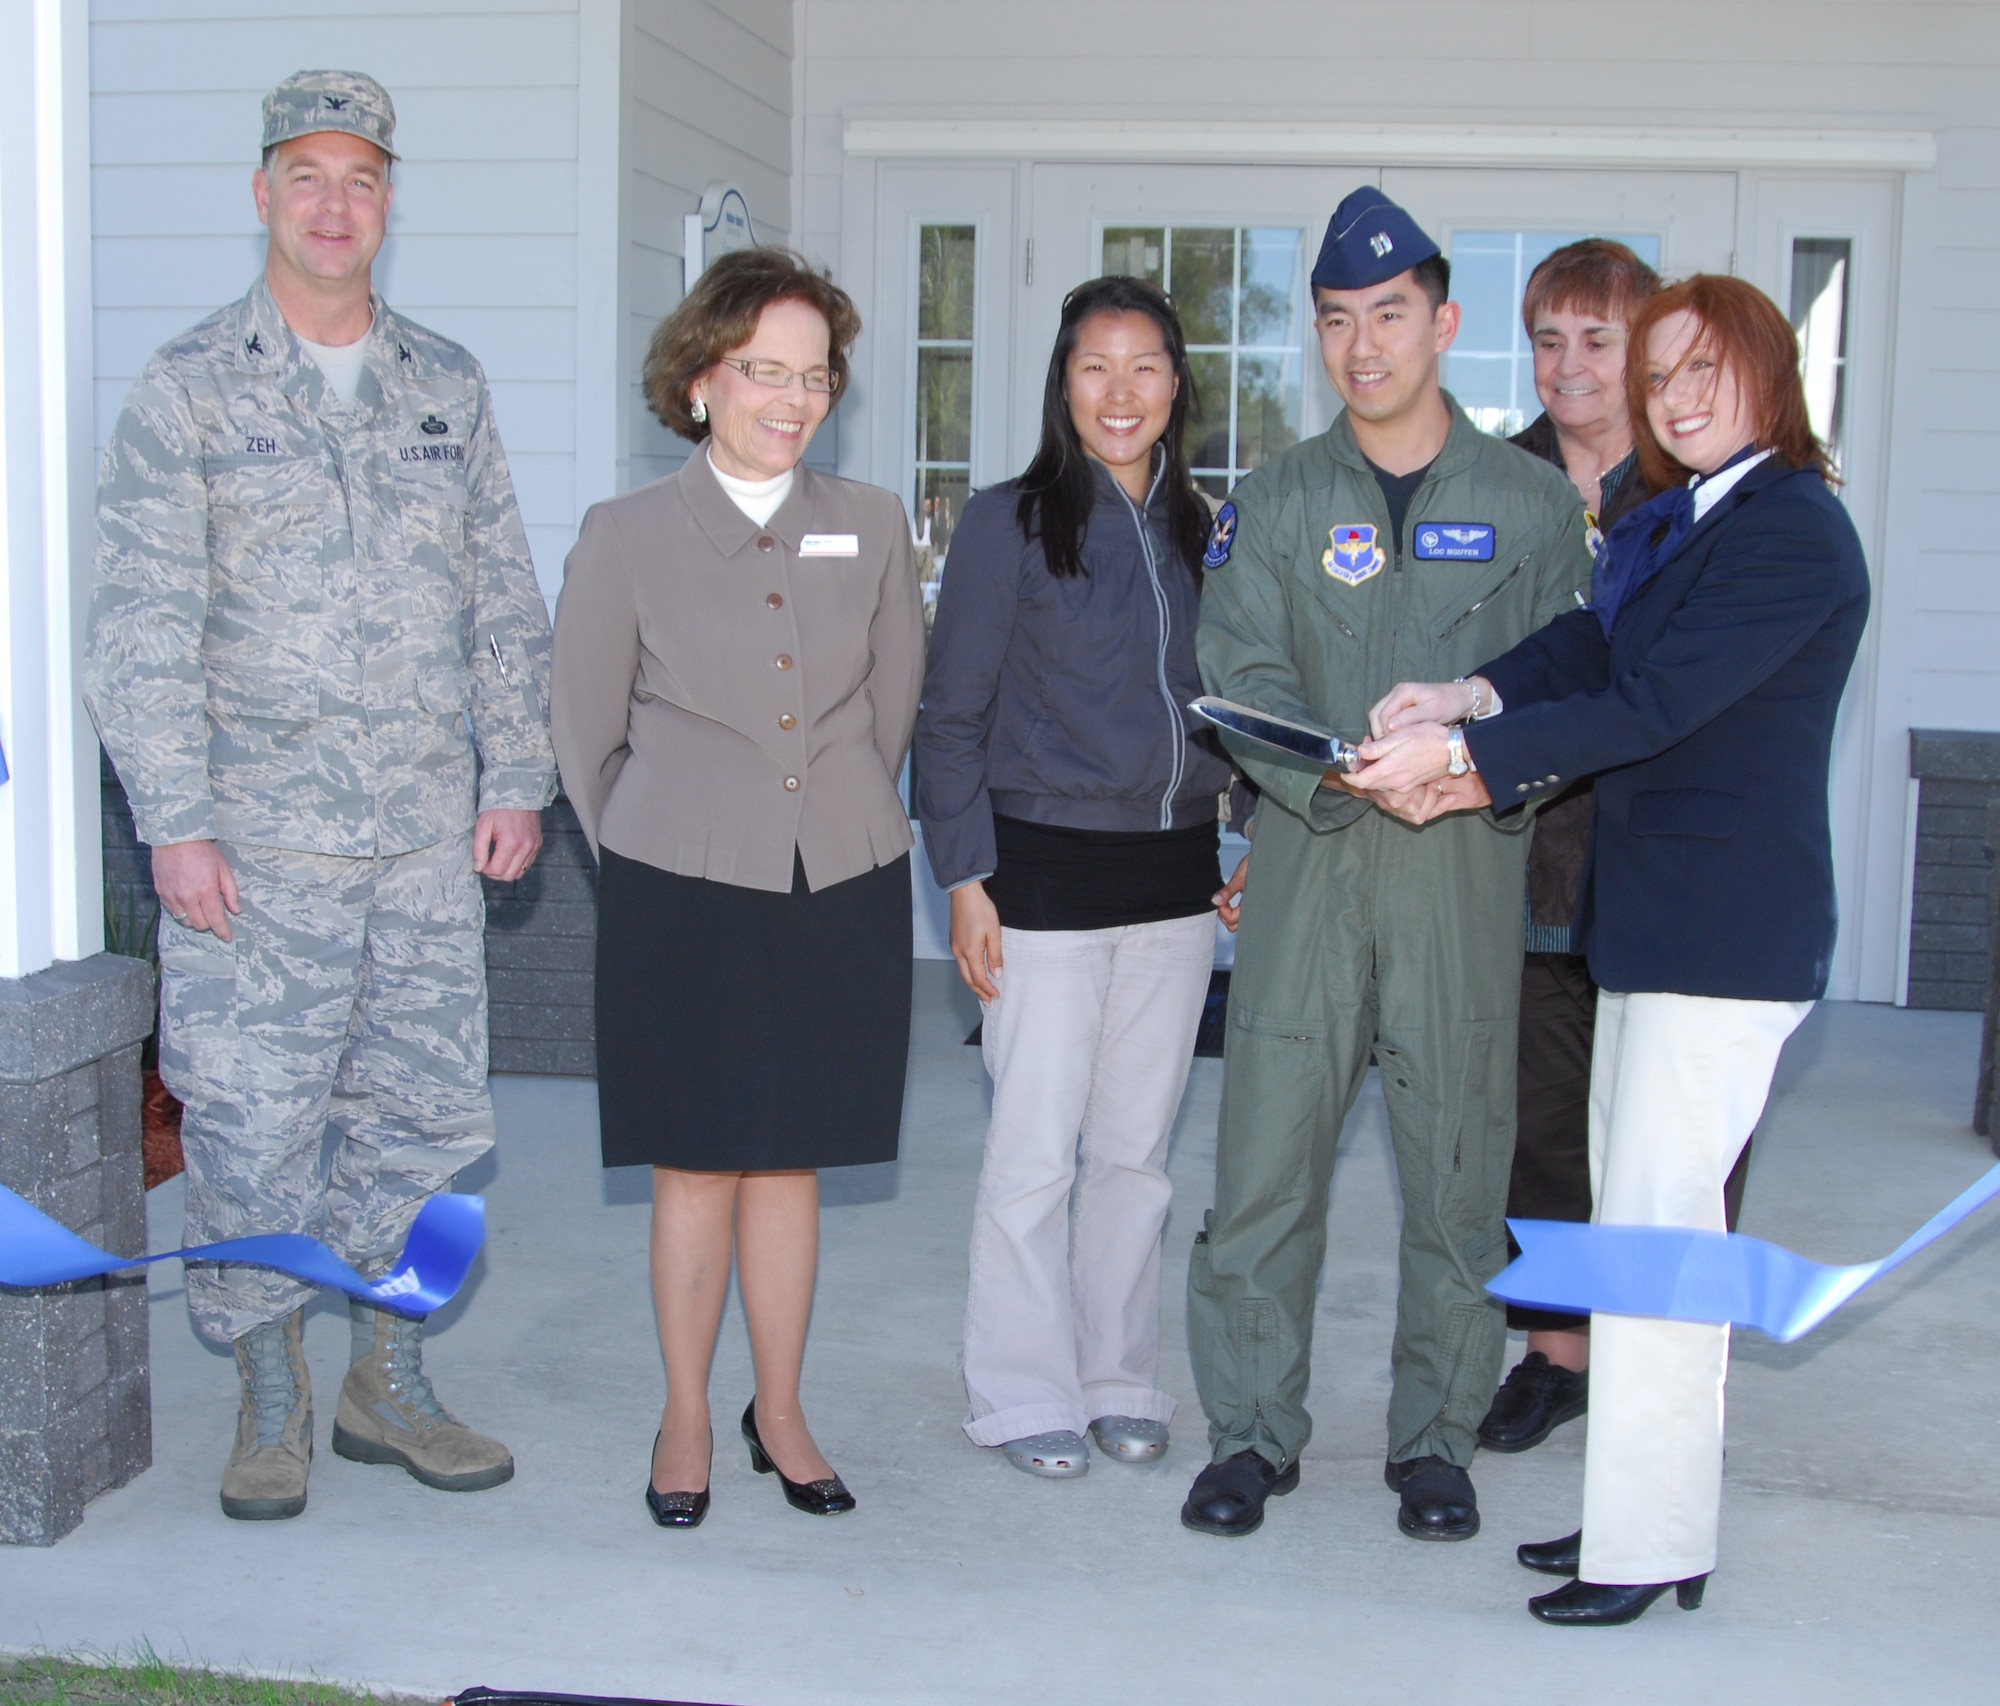 Col. David Zeh, 325th Mission Support Group commander, along with Terri Edelman, Balfour Beatty Communities Senior Vice President, Capt. Loc Nguyen and wife Lilly Nguyen, base residents, Mary Ann Barbieri, government housing management specialist, and Teri Henry, BBC manager, cut the ribbon to the brand new community center in Wood Manor housing Wednesday.  (U.S. Air Force photo by Lisa Norman)